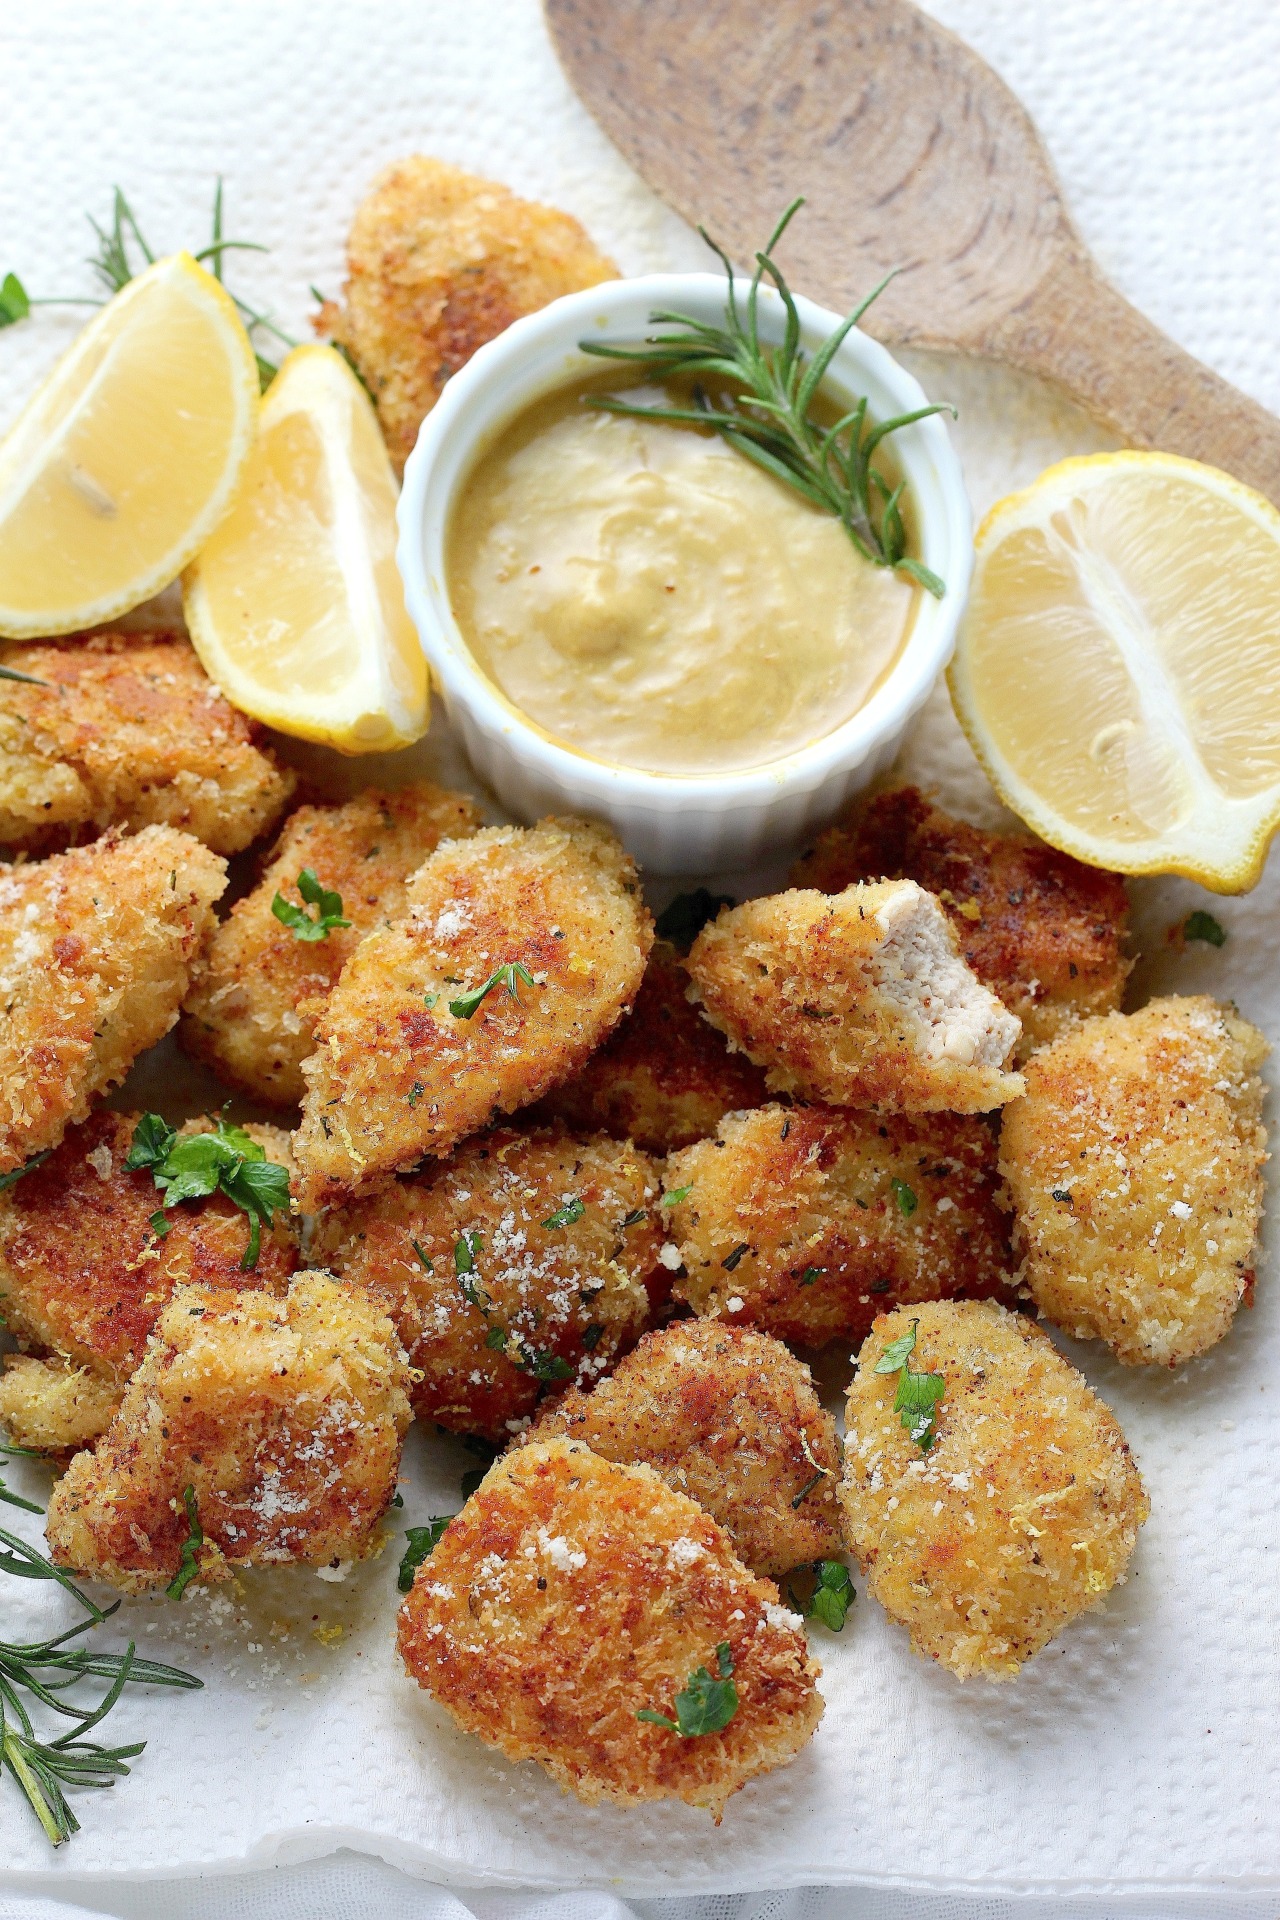 Rosemary Parmesan Chicken Nuggets